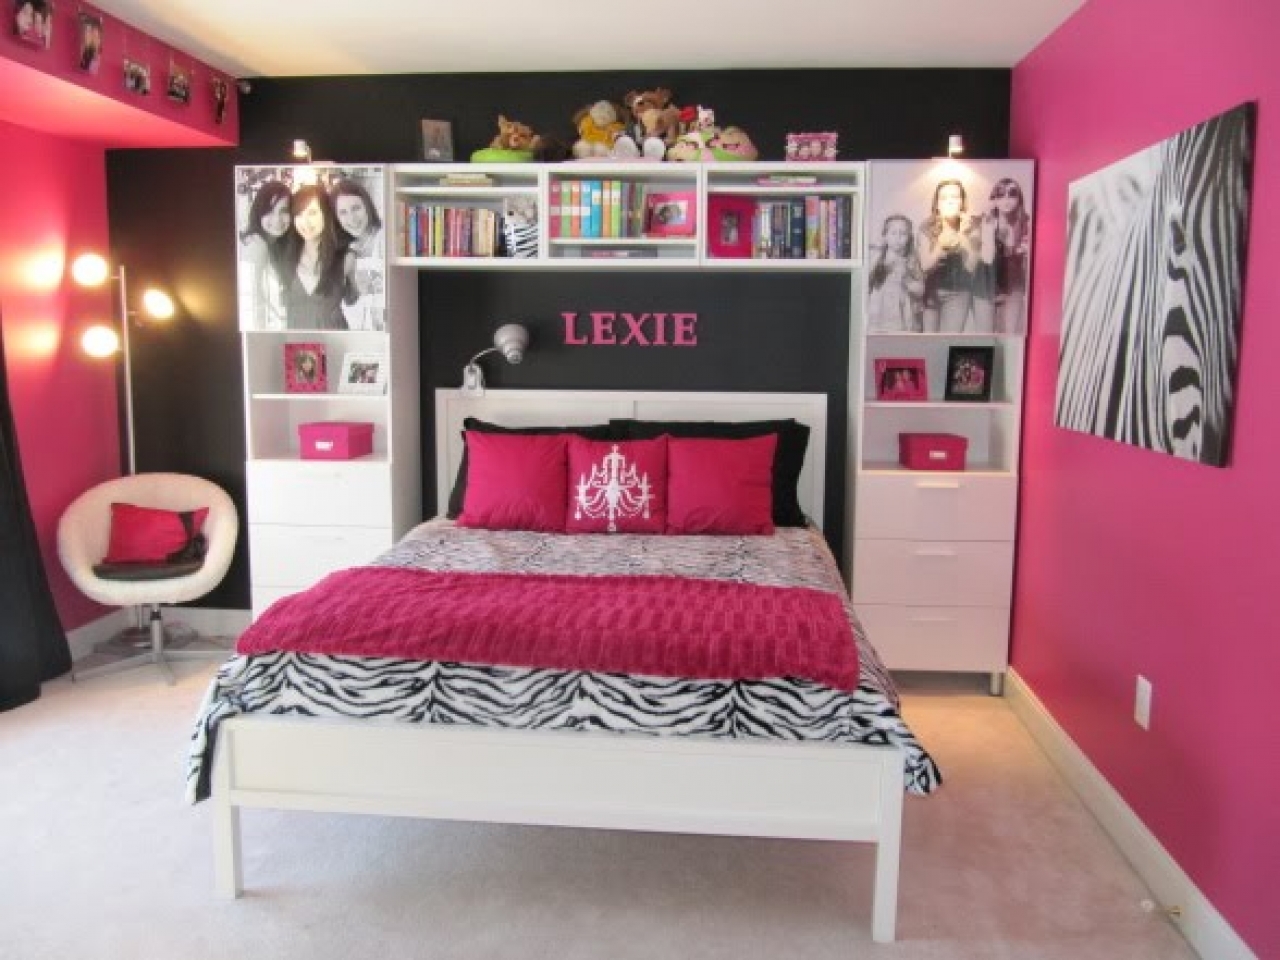 Tumblr Bedroom For Girls Designing - Awesome Room Ideas For Girls - HD Wallpaper 